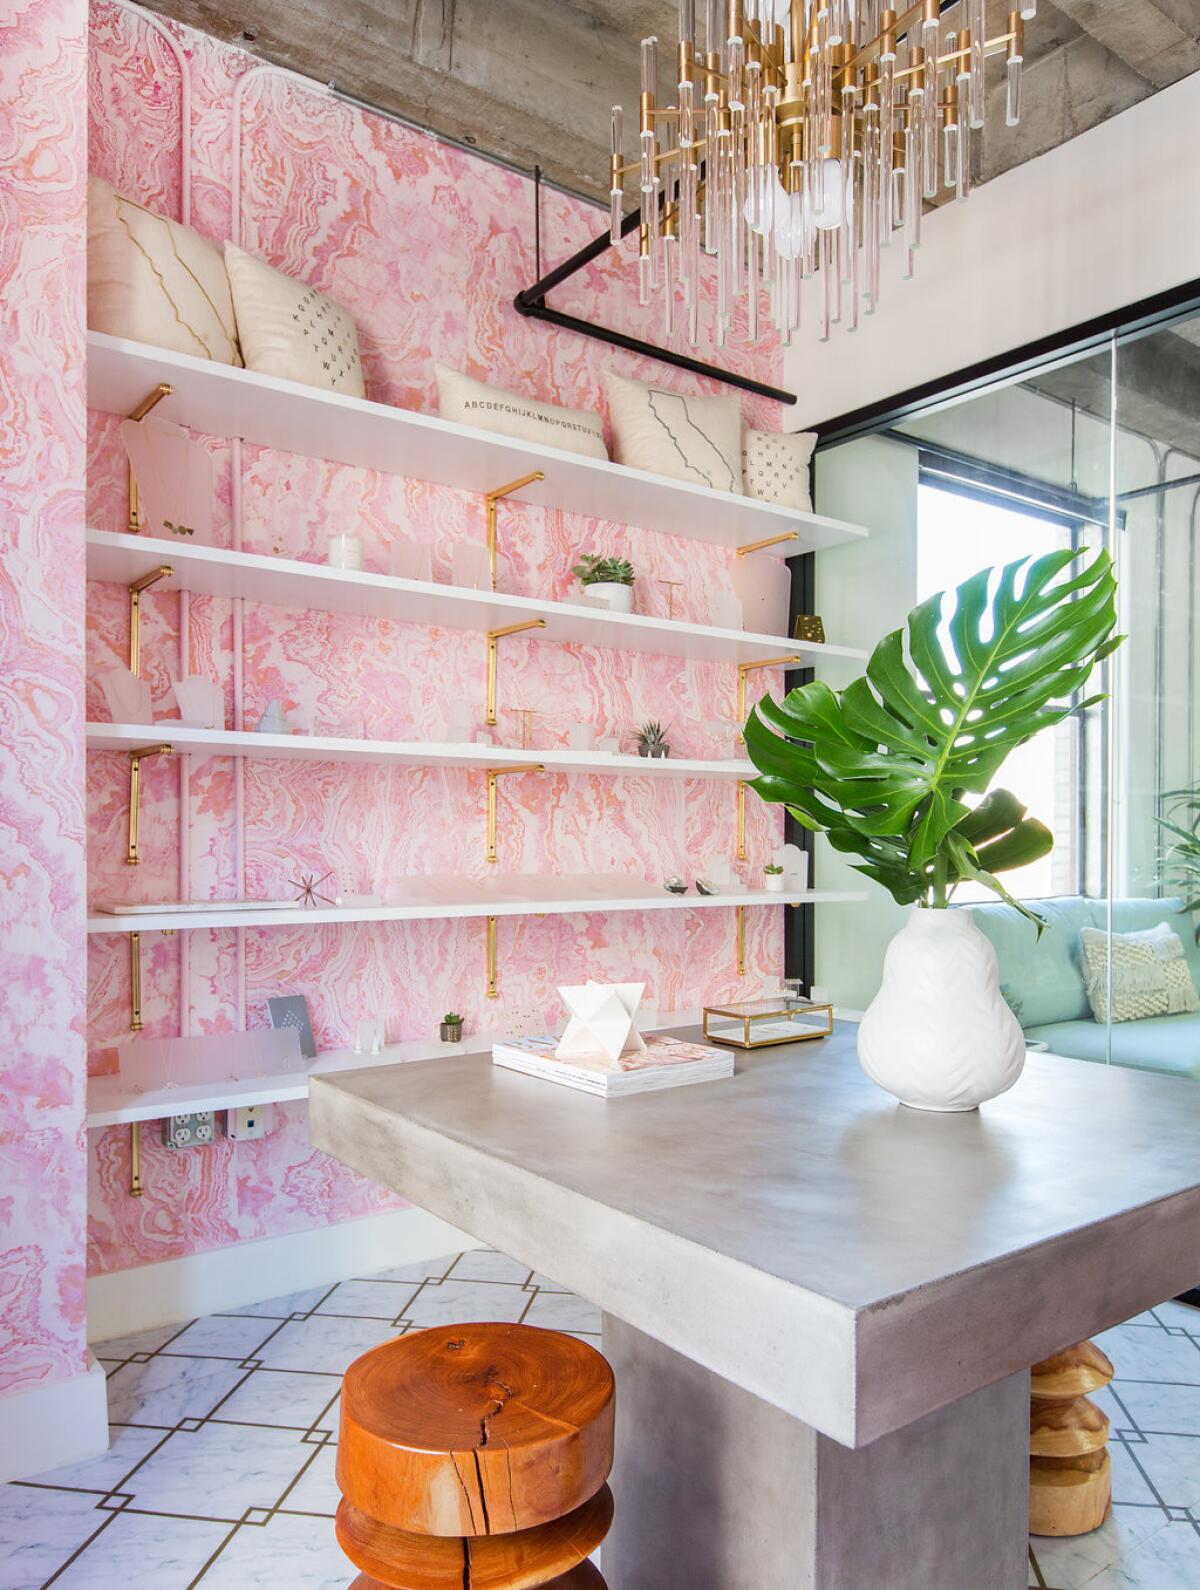 The glassed-in showroom is adorned with Pink Marble wallpaper from the Lulu & Georgia collection.